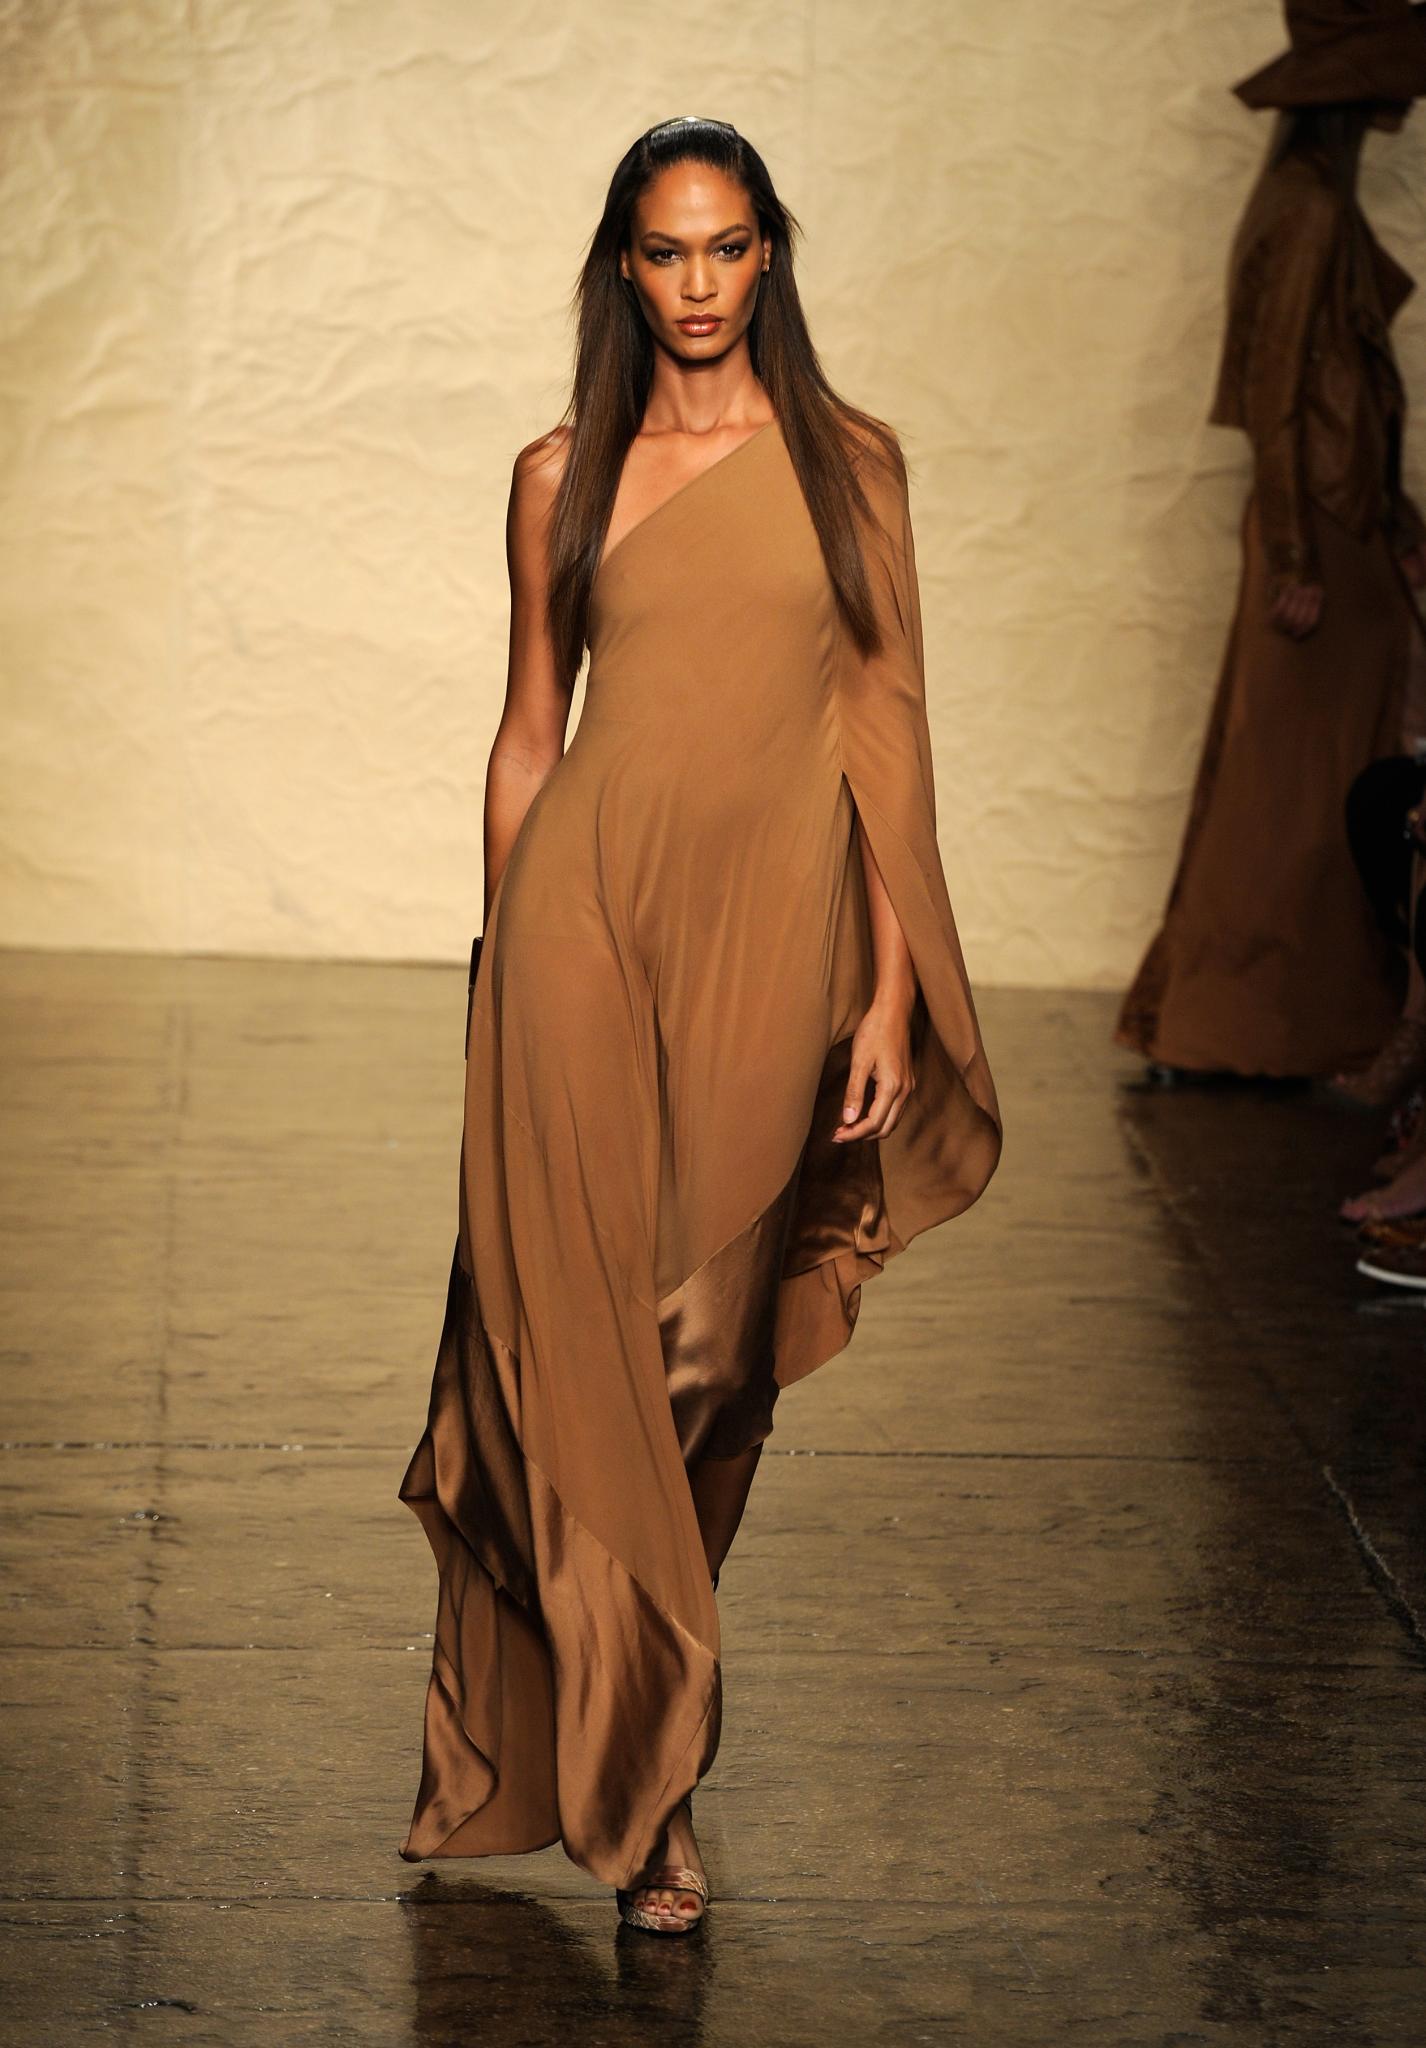 Model of the Year: Joan Smalls